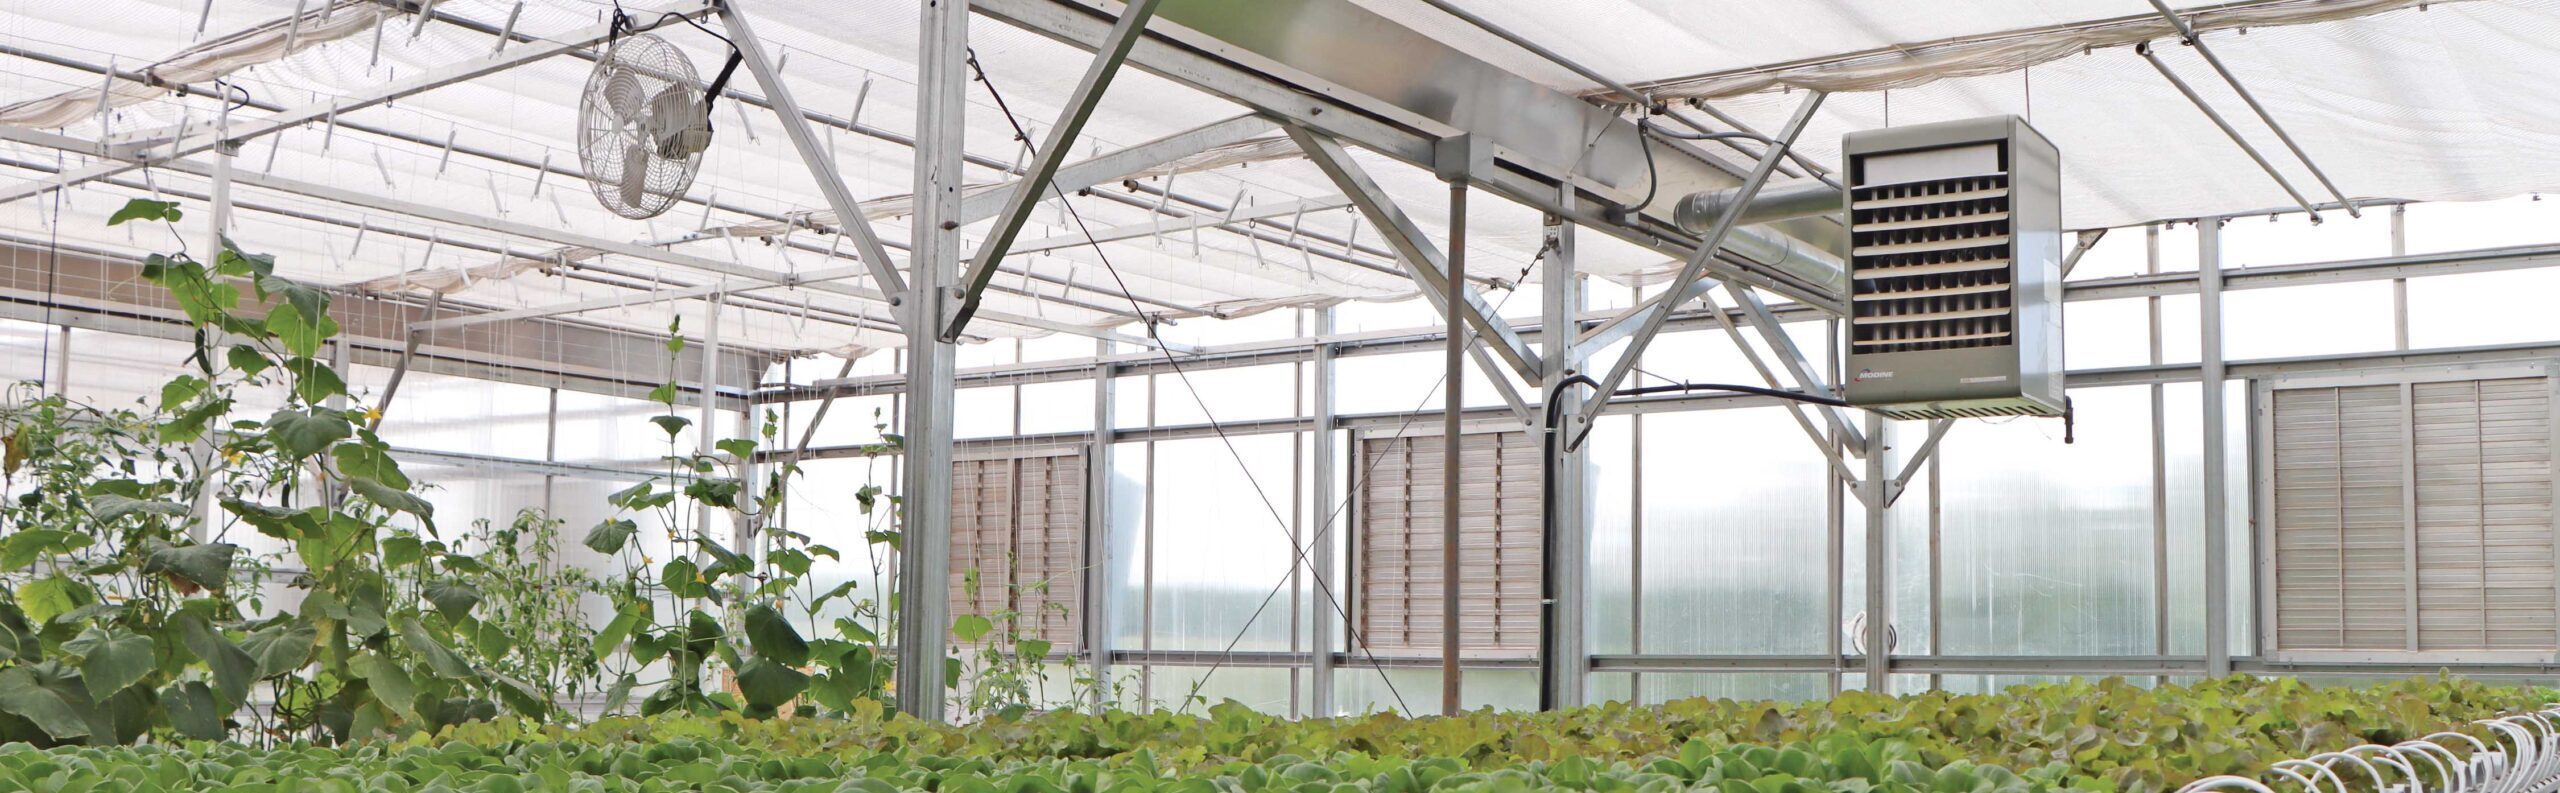 hydroponics and suspended heater unit in a greenhouse in winter